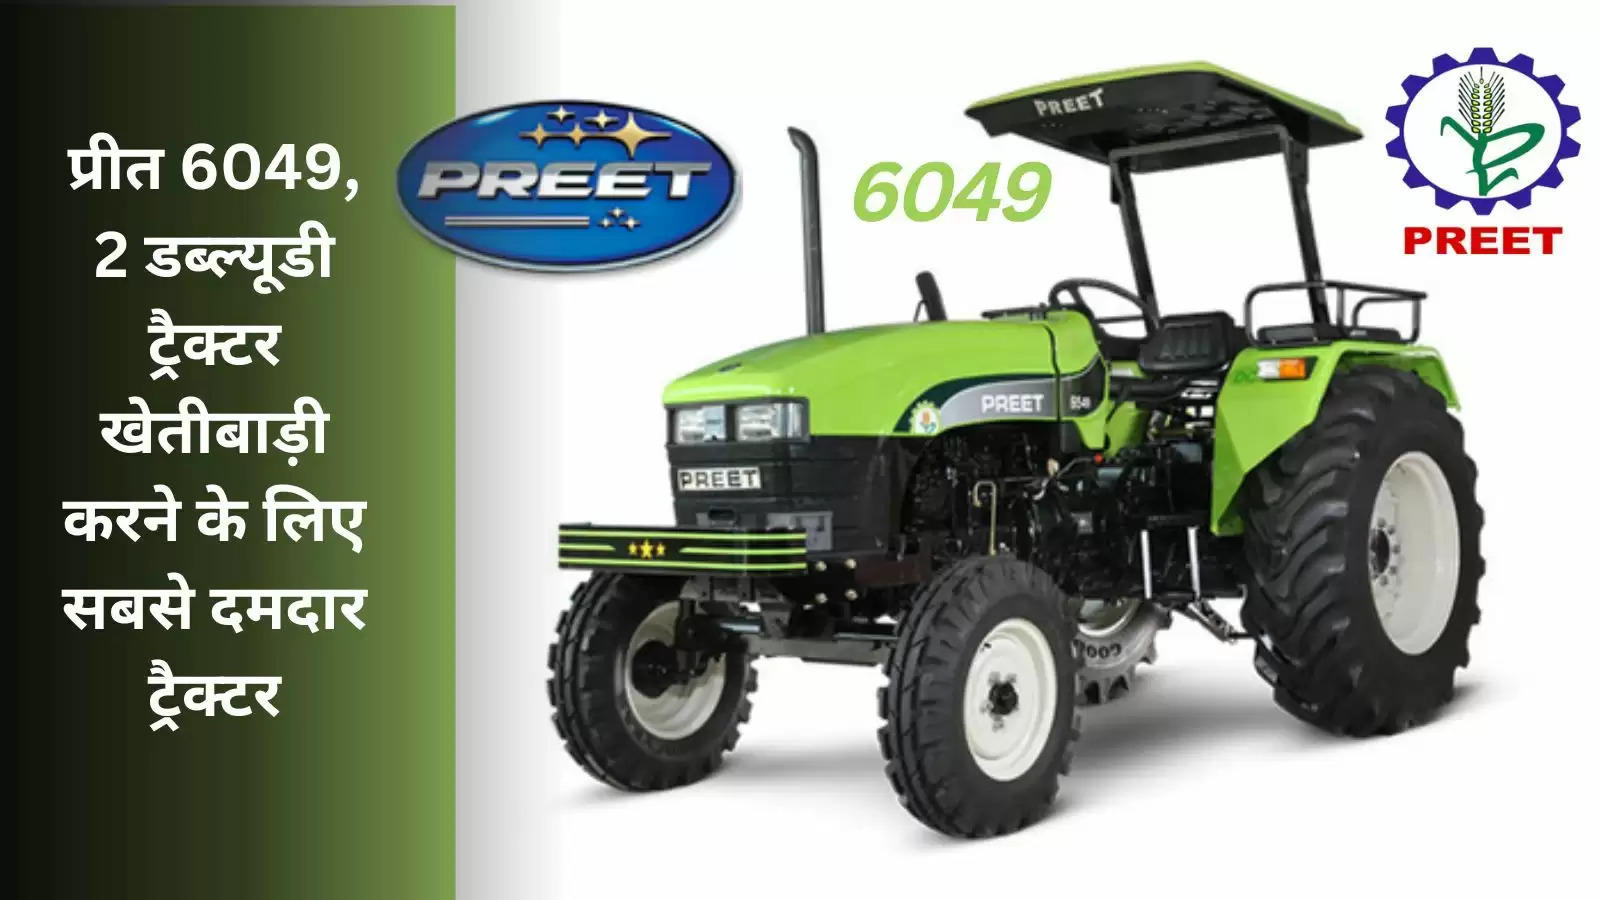 preet-6049-tractor-in-60-hp